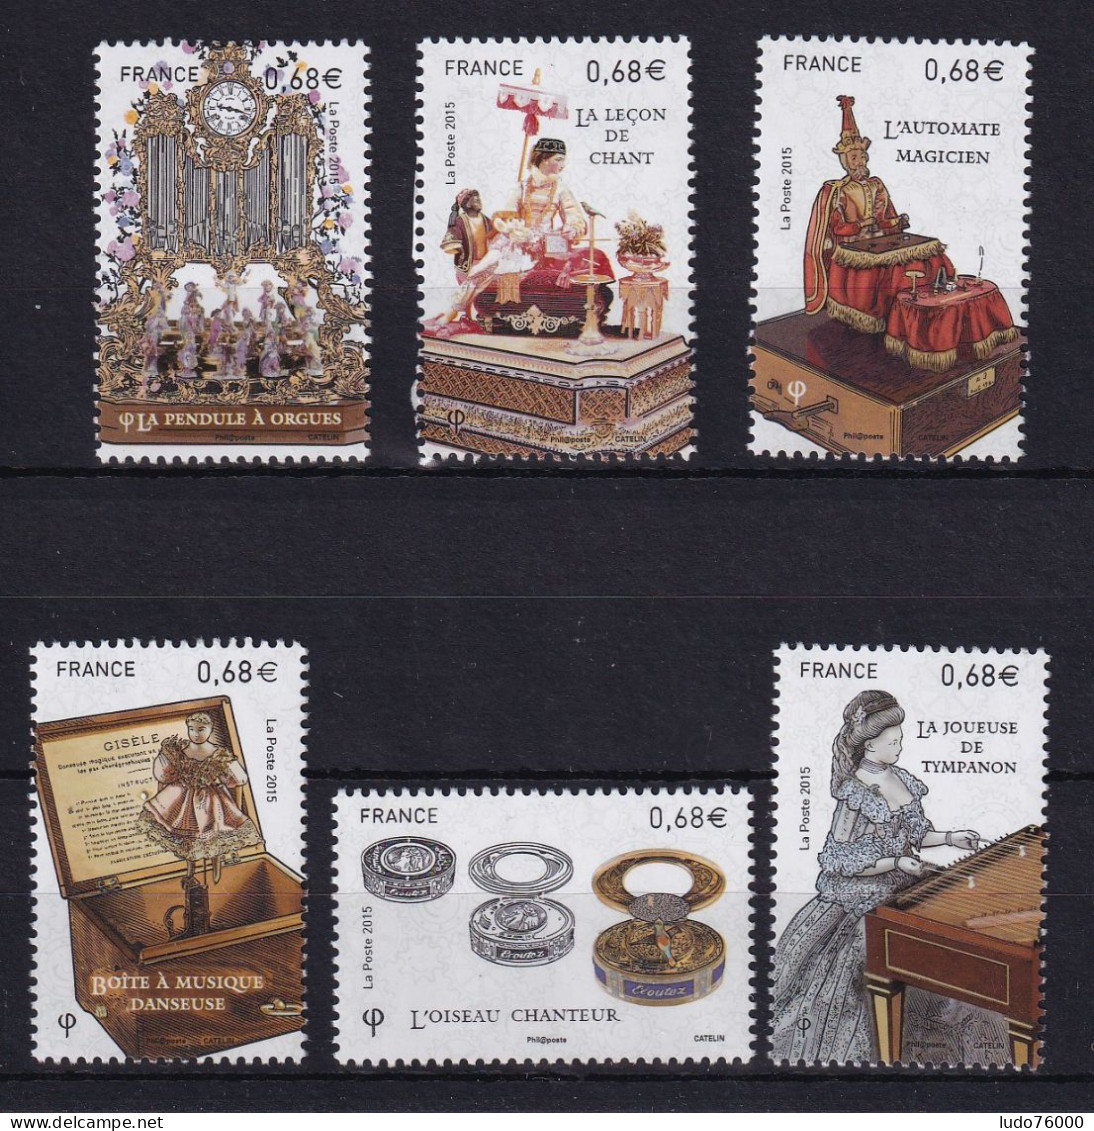 D 802 / N° 4993/4998 NEUF** COTE 18€ - Collections